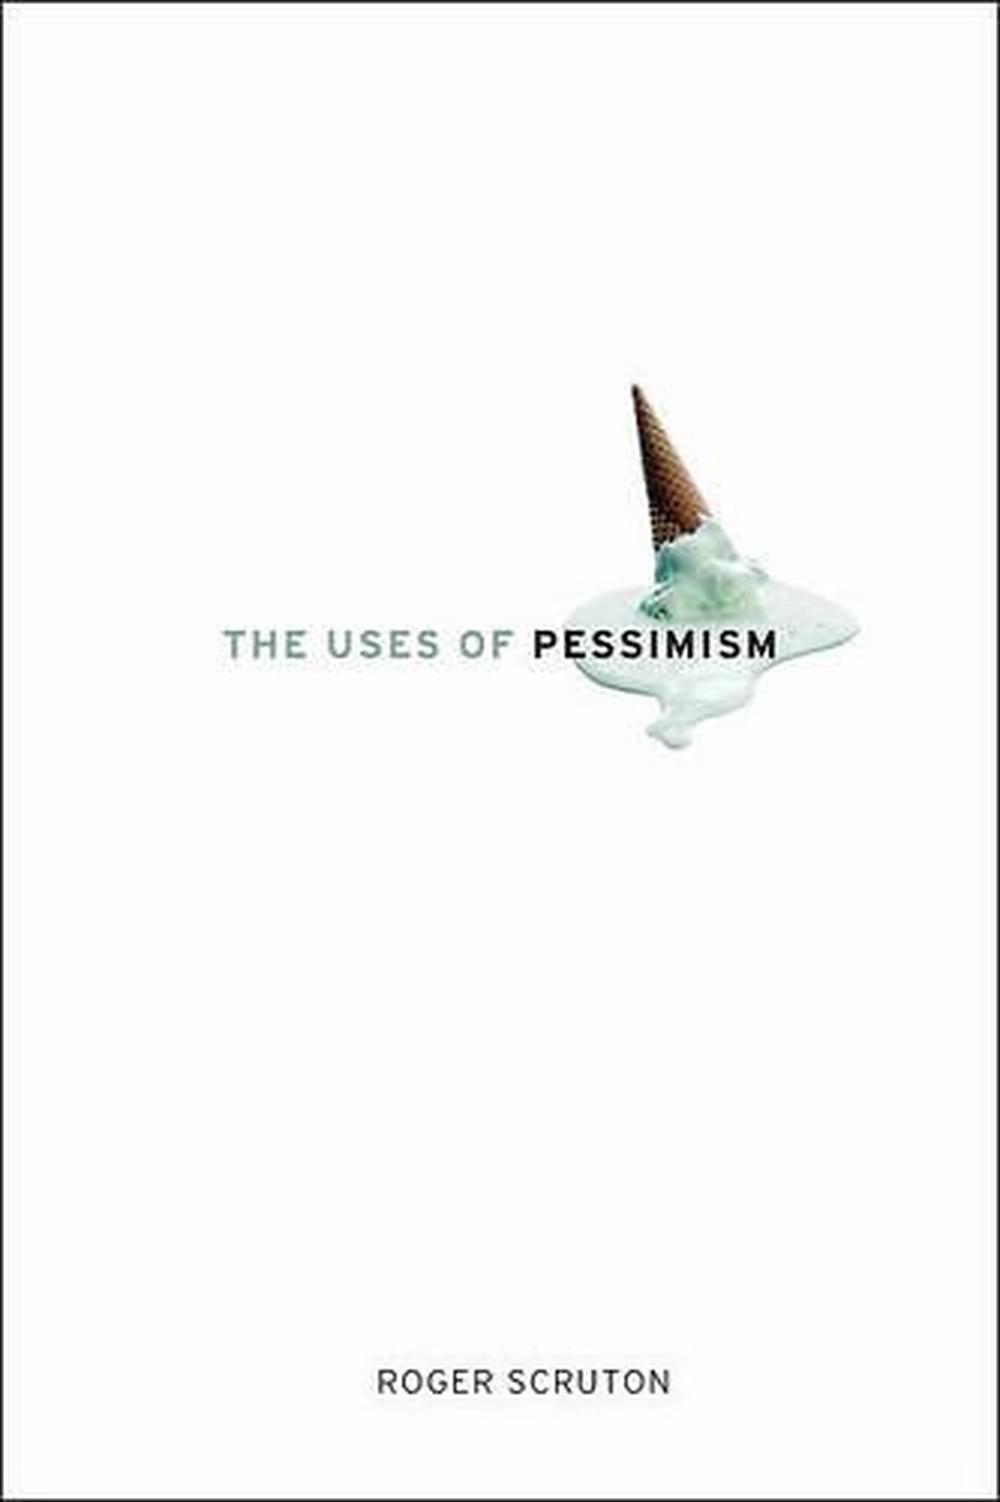 The Uses of Pessimism And the Danger of False Hope by Roger Scruton